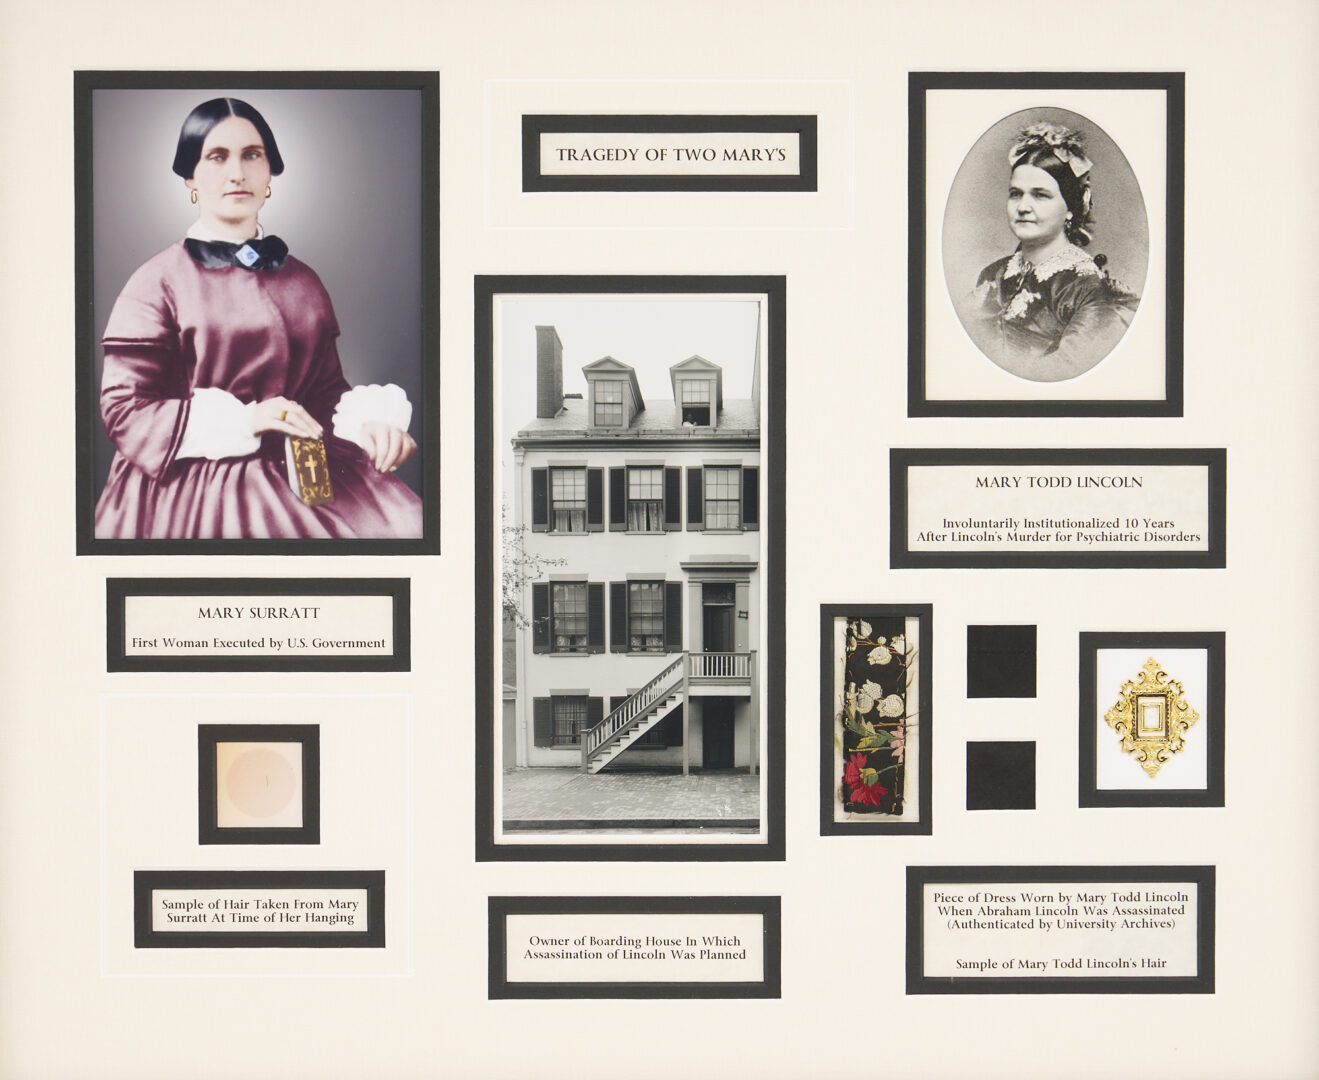 Lot 556: Mary Todd Lincoln Dress Fragment and Hair Sample in Shadowbox